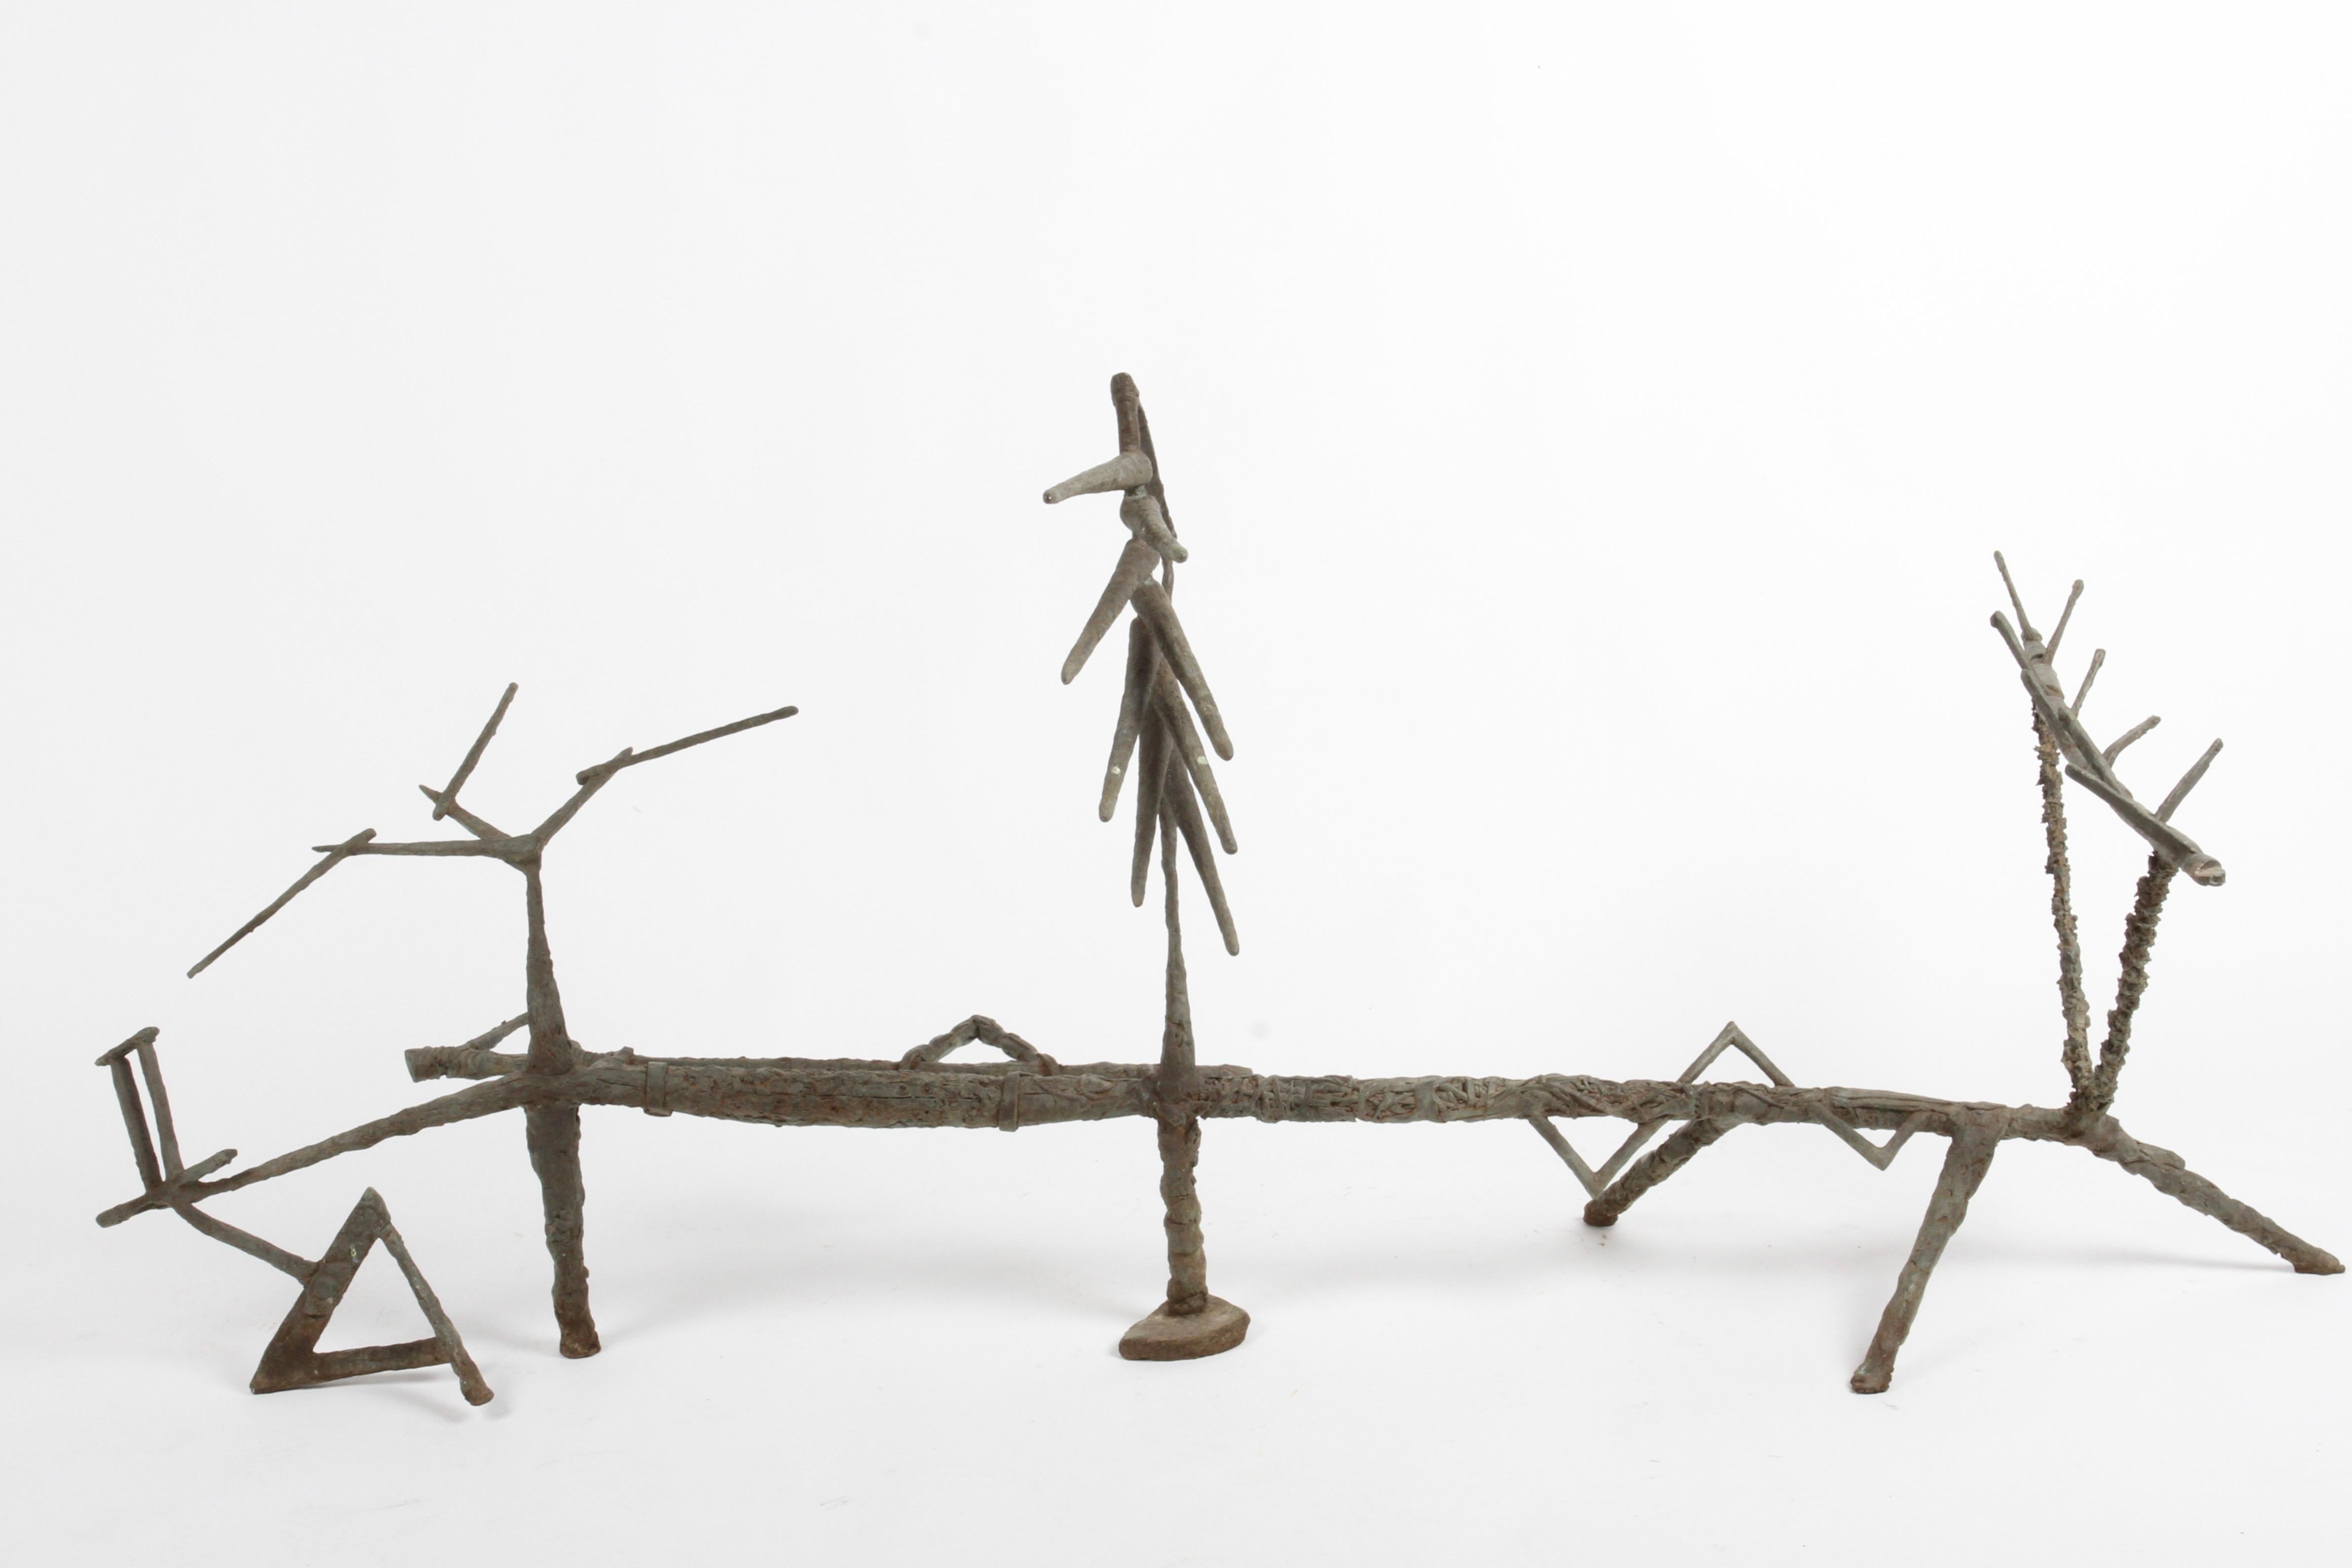 Organic form bronze garden or yard sculpture by California Sculptor Tim Doyle. Influenced by Alberto Giacometti, with use of African tribal motifs and brutalist textures. This sculpture was cast using the lost wax method while Tim was at Southern